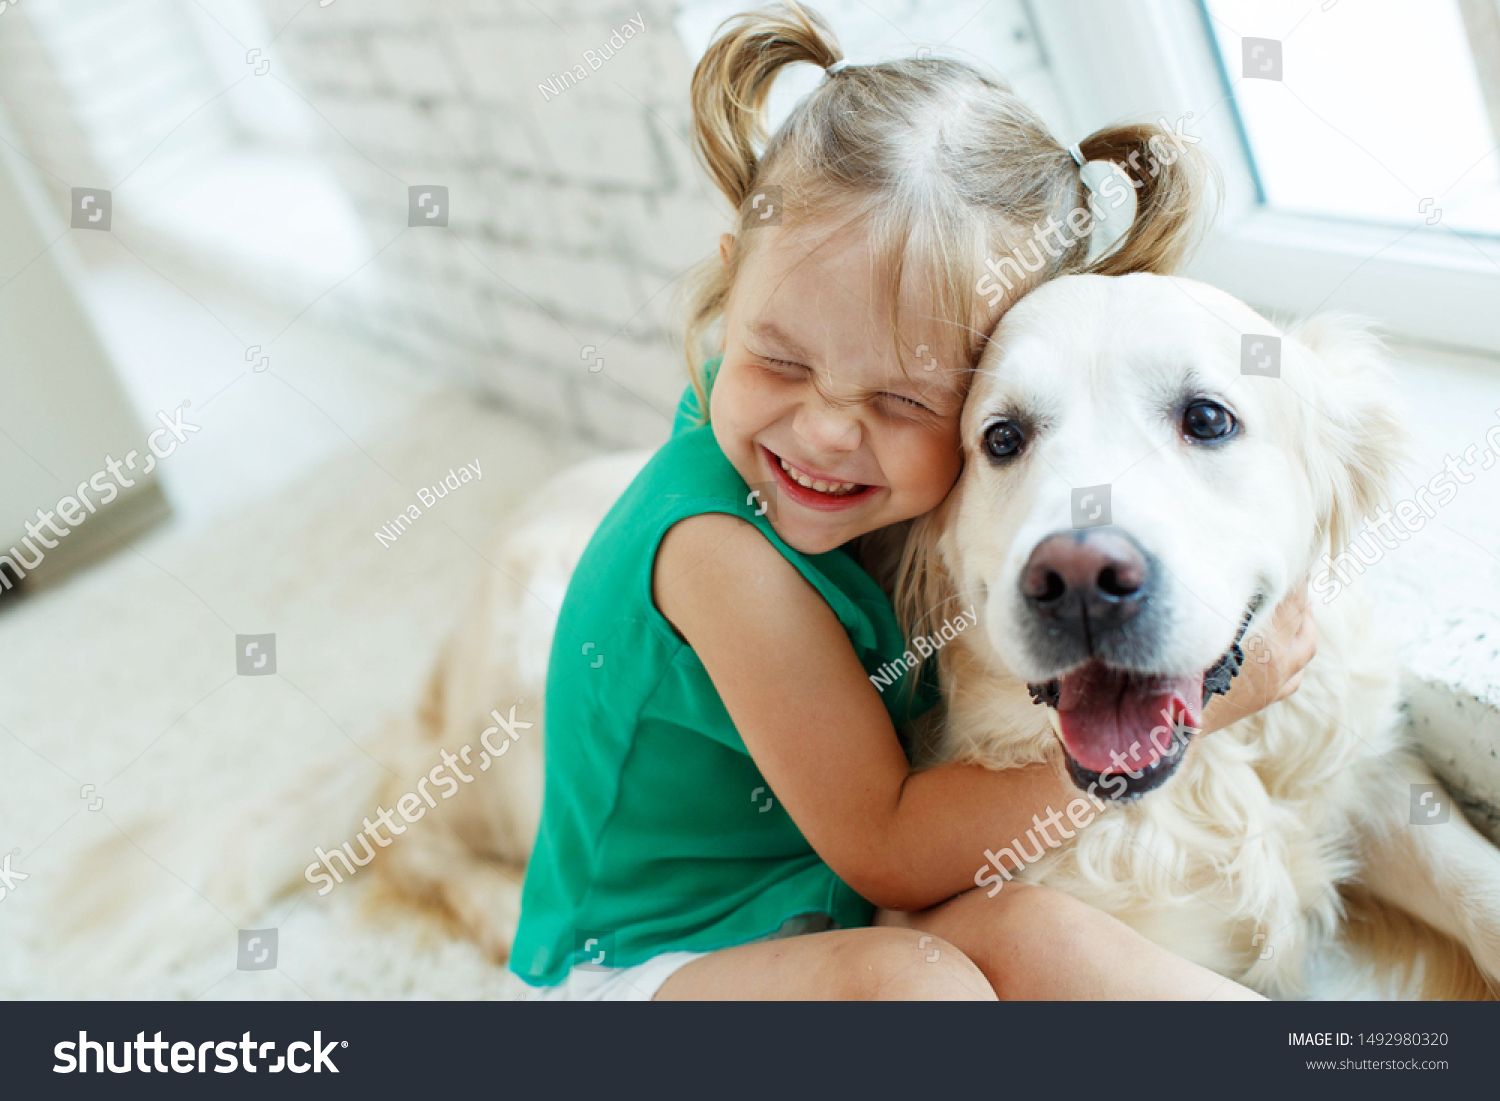 A child with a dog. Girl with a Labrador at home.  #1492980320